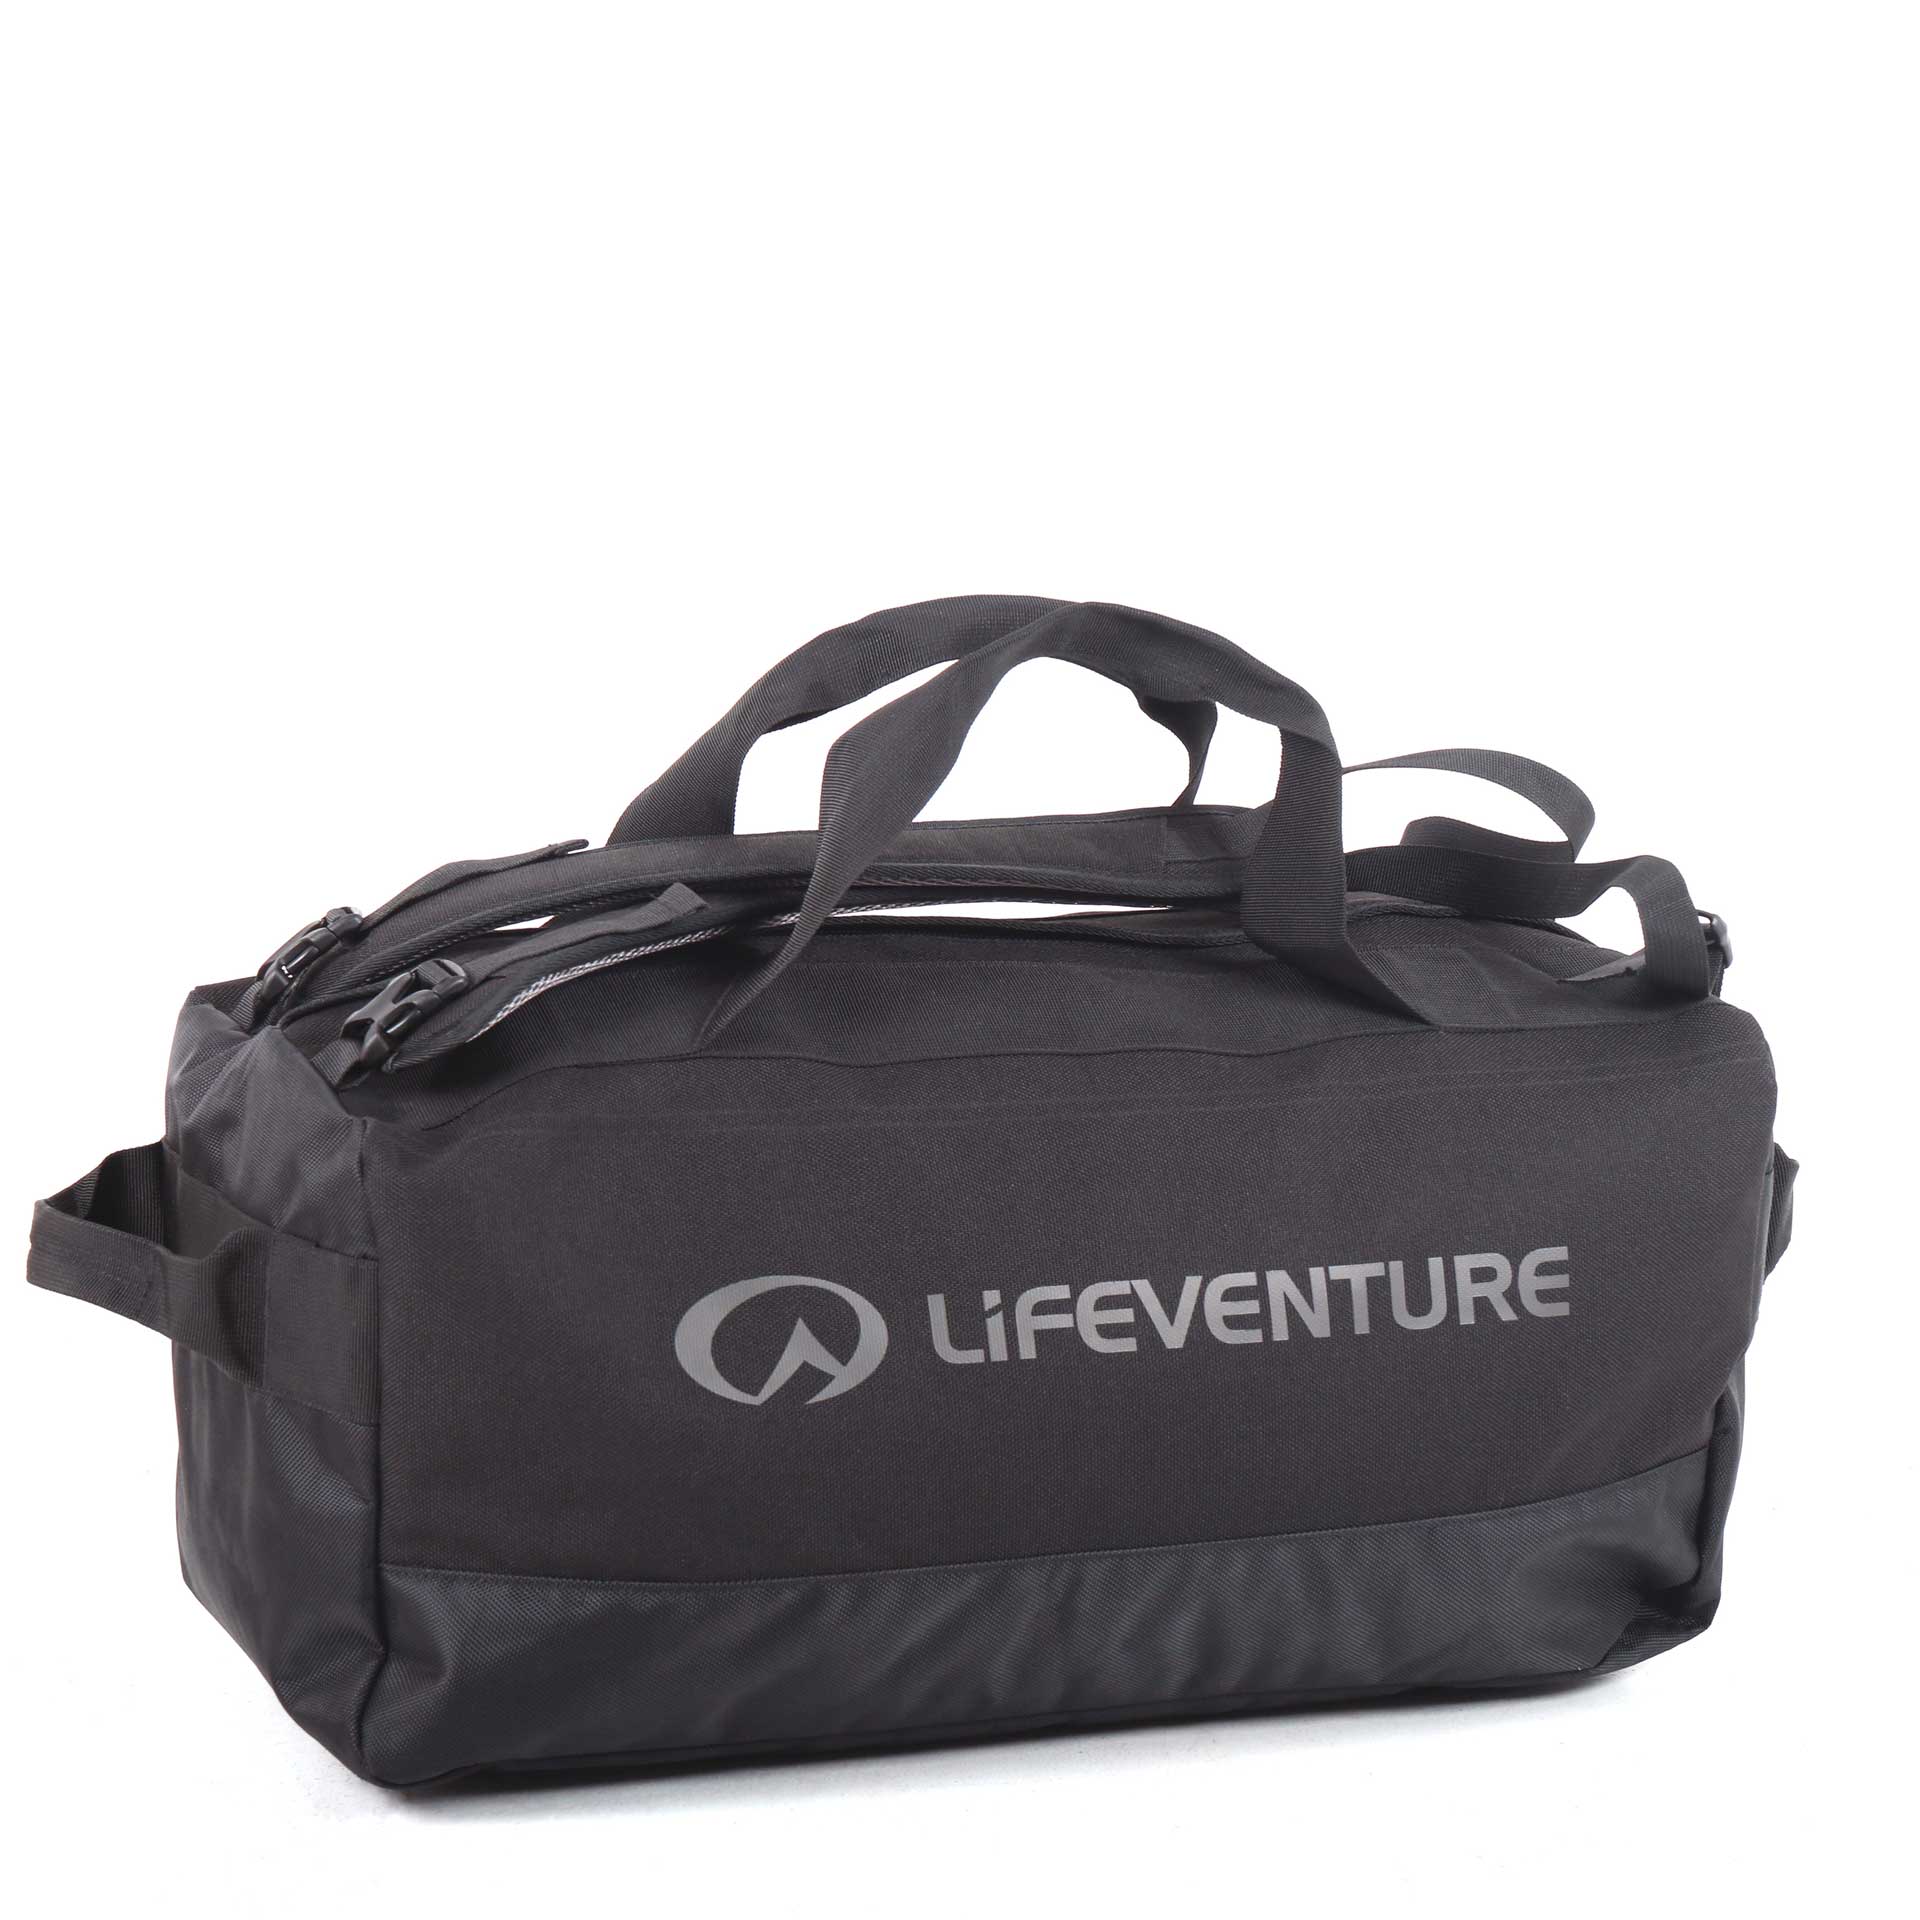 Expedition Cargo Duffle Bag - 50L